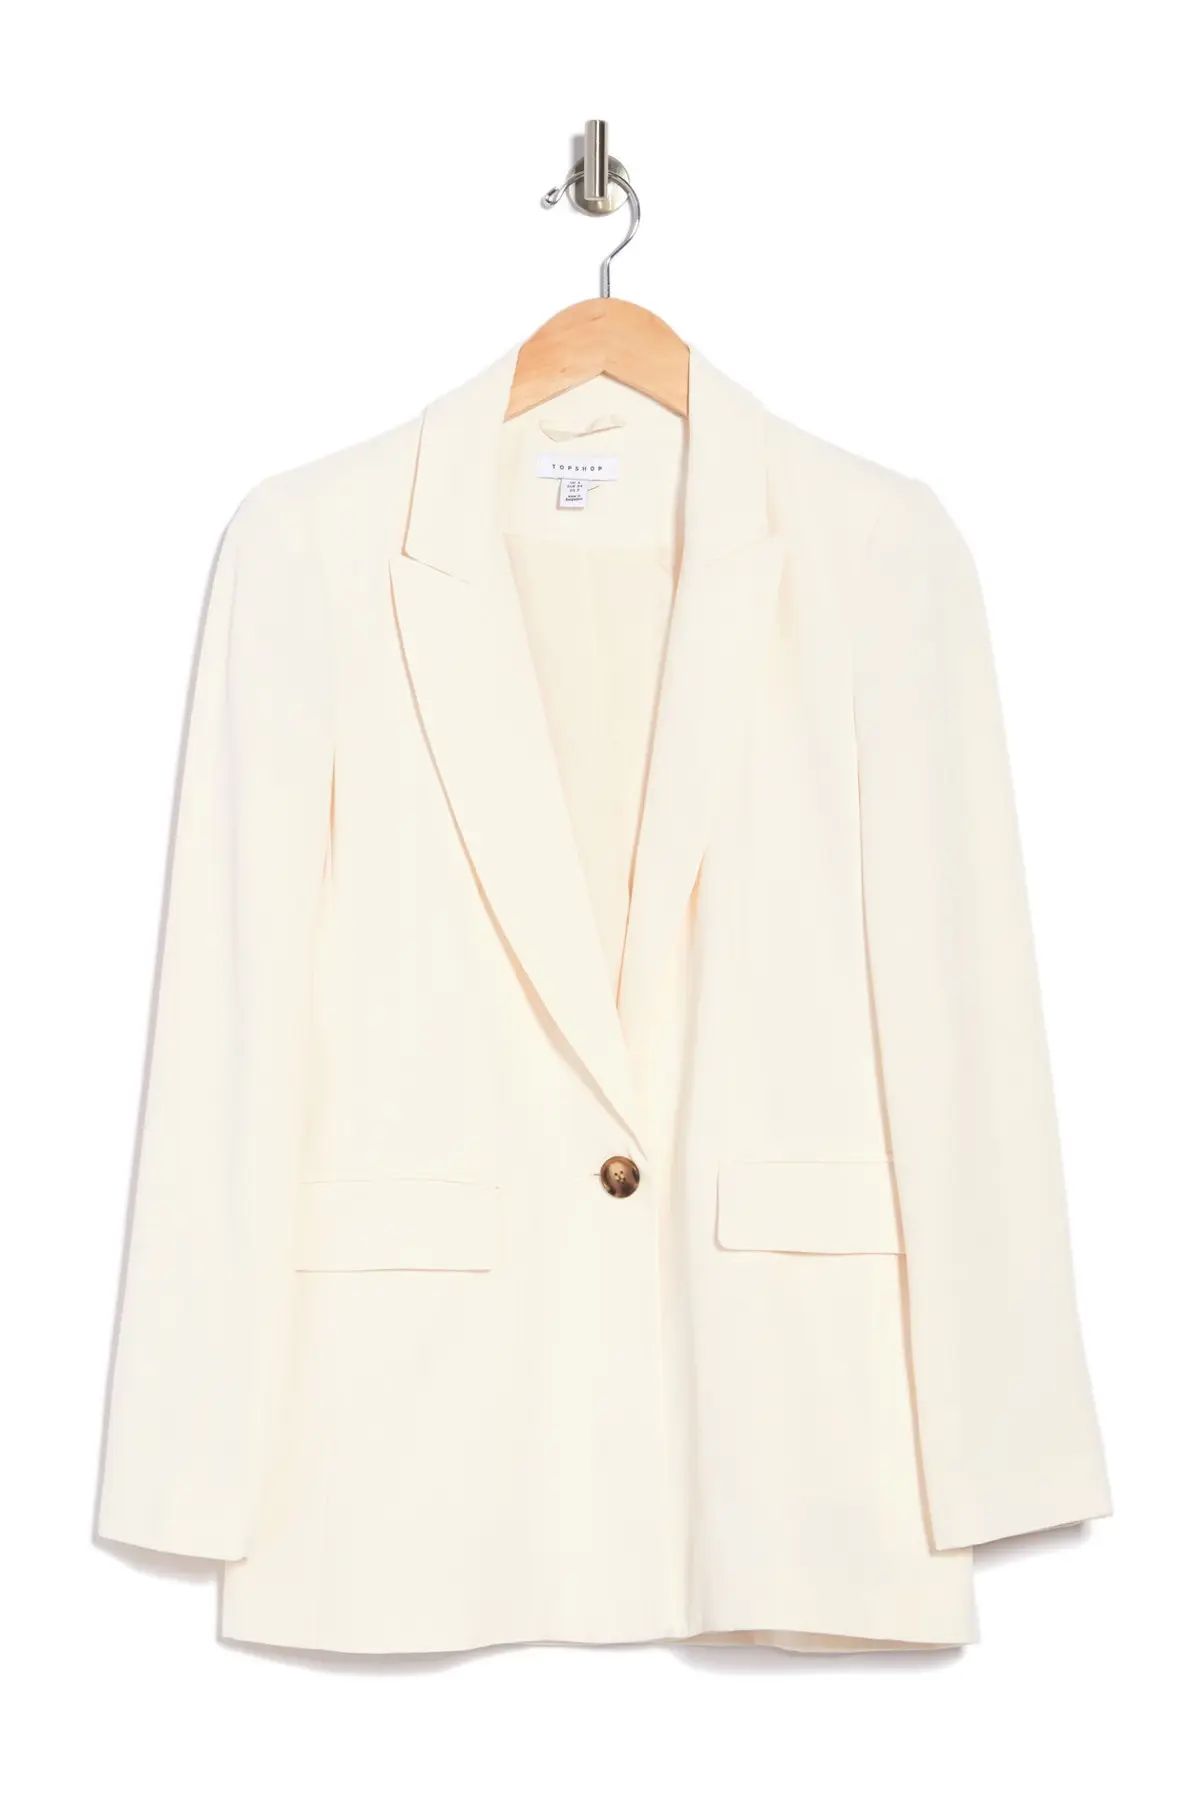 TOPSHOP | Lily Solid Twill Single Button Blazer | Nordstrom Rack | Nordstrom Rack